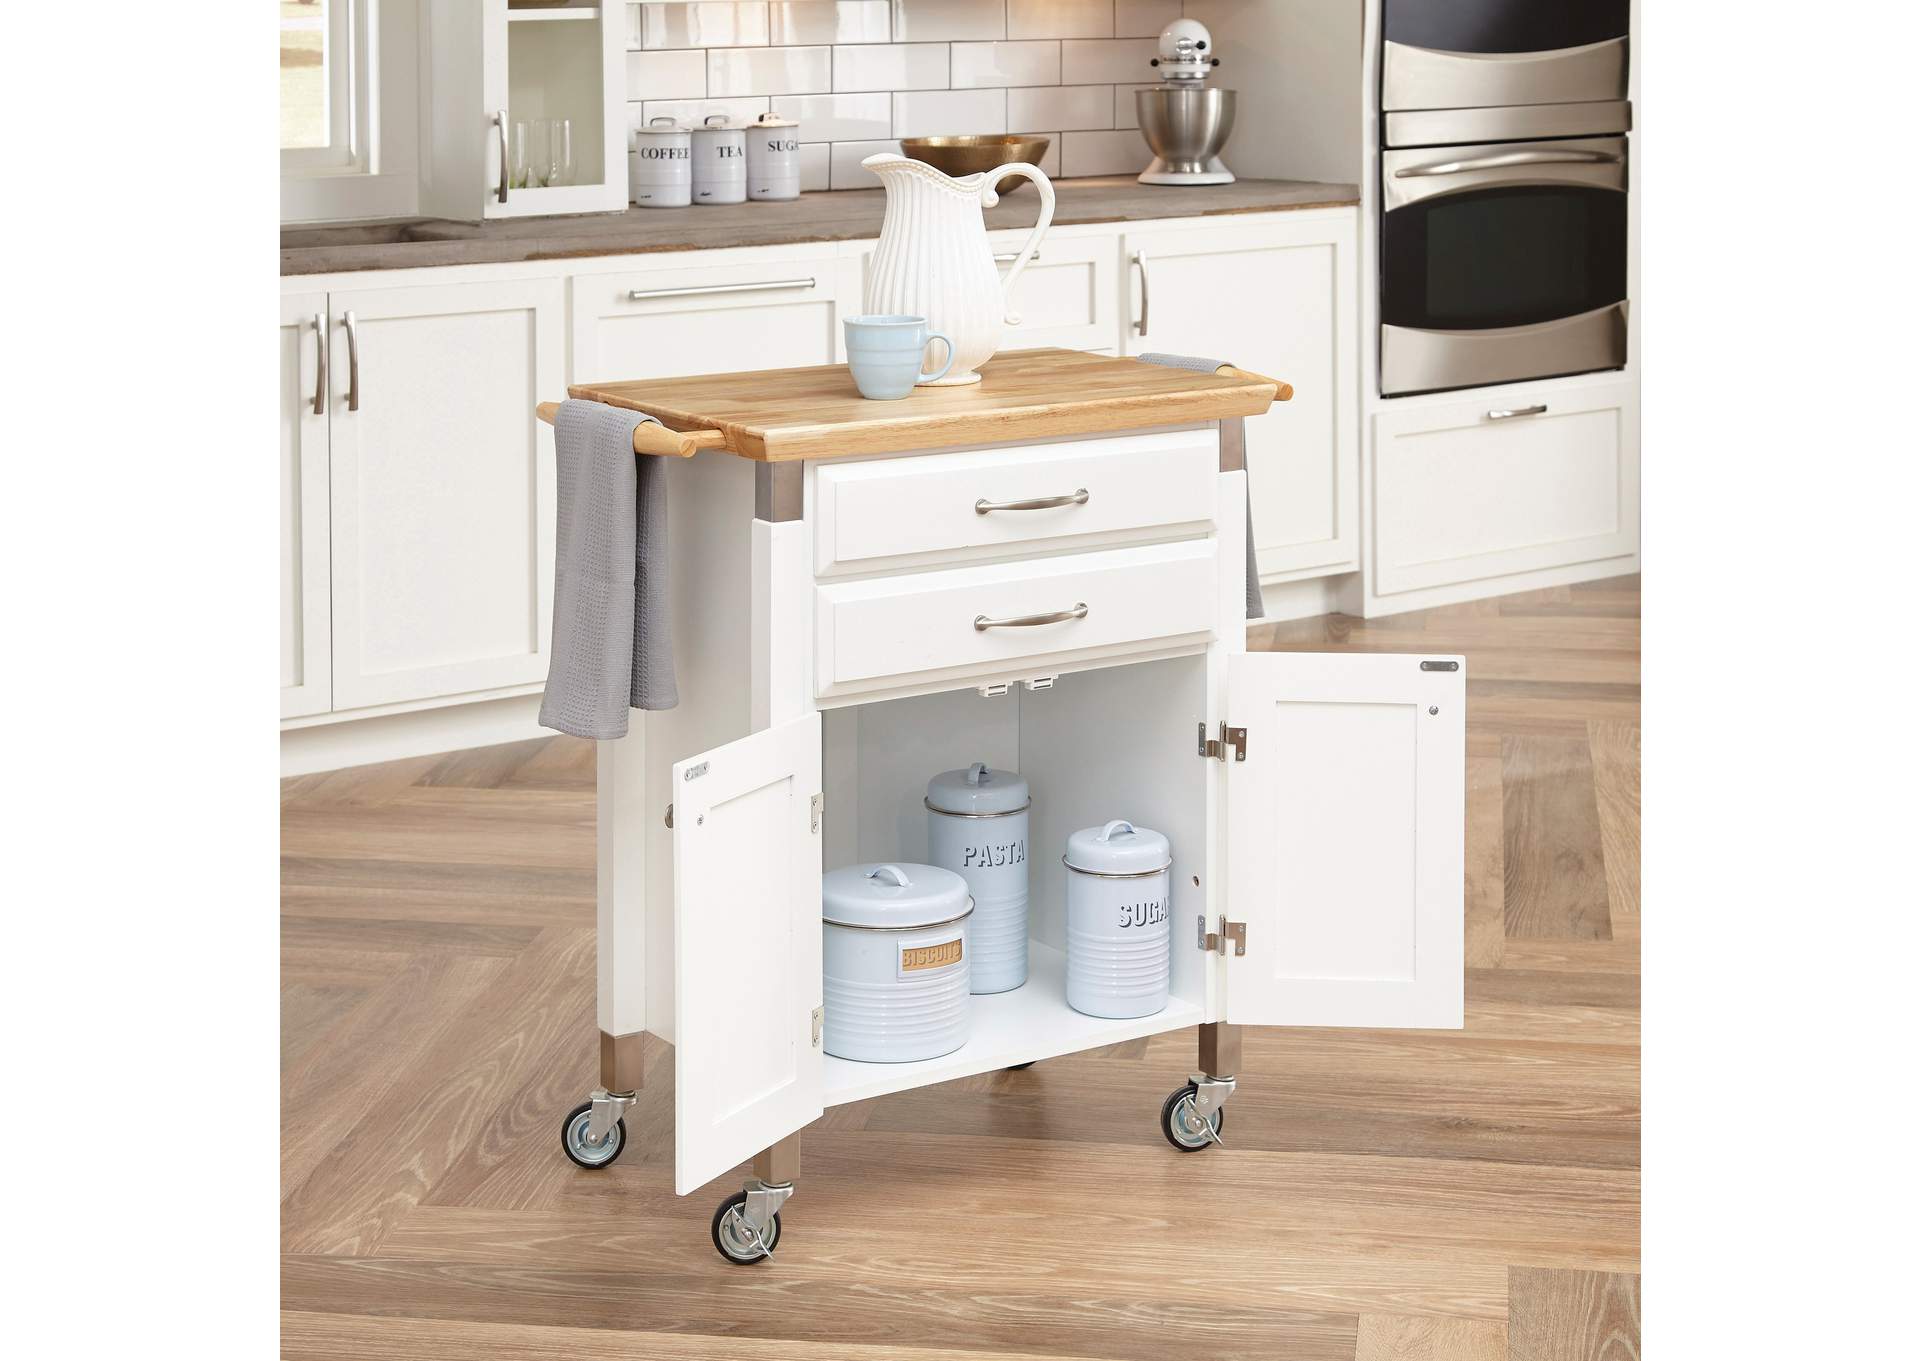 Dolly Madison Kitchen Cart By Homestyles,Homestyles